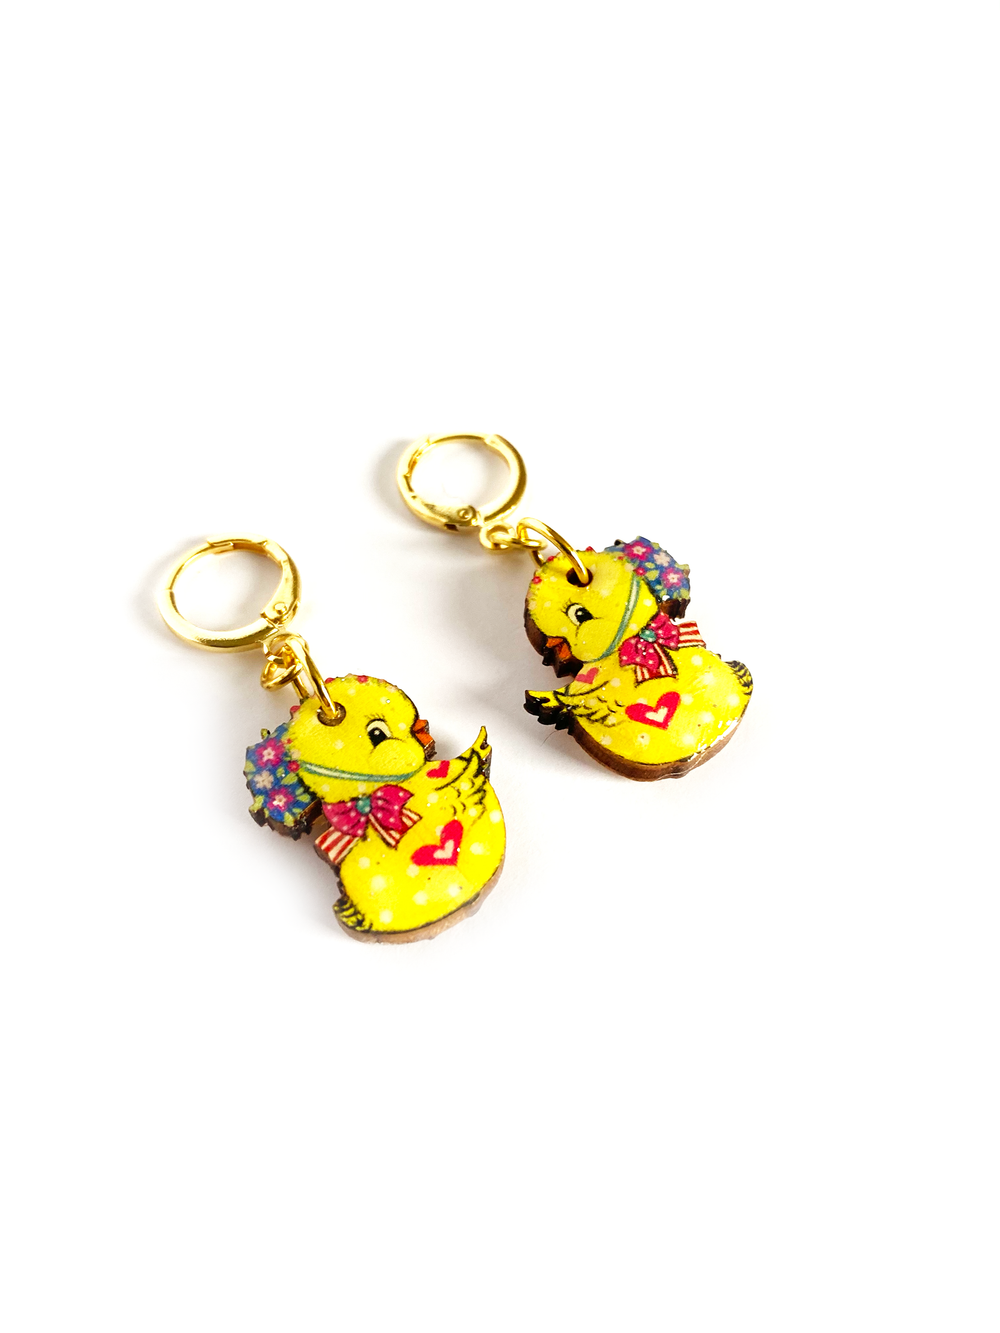 'Charlie the Chic drop earrings - with huggie hoops!' Cute Easter chic drop earrings featuring ducky the magical little baby chic. Beautifully illustrated in light in pastel and bright yellow. Incredibly comfy to wear, and beautifully made. Brighten up your easter with these special pieces of jewellery. Earrings basics * Measurement 6cm x 6xm * Bunny theme * Miss matched colours * Resin on woods creating a glass affect * Gold plated comfy huggie hoops * Perfect for day wear